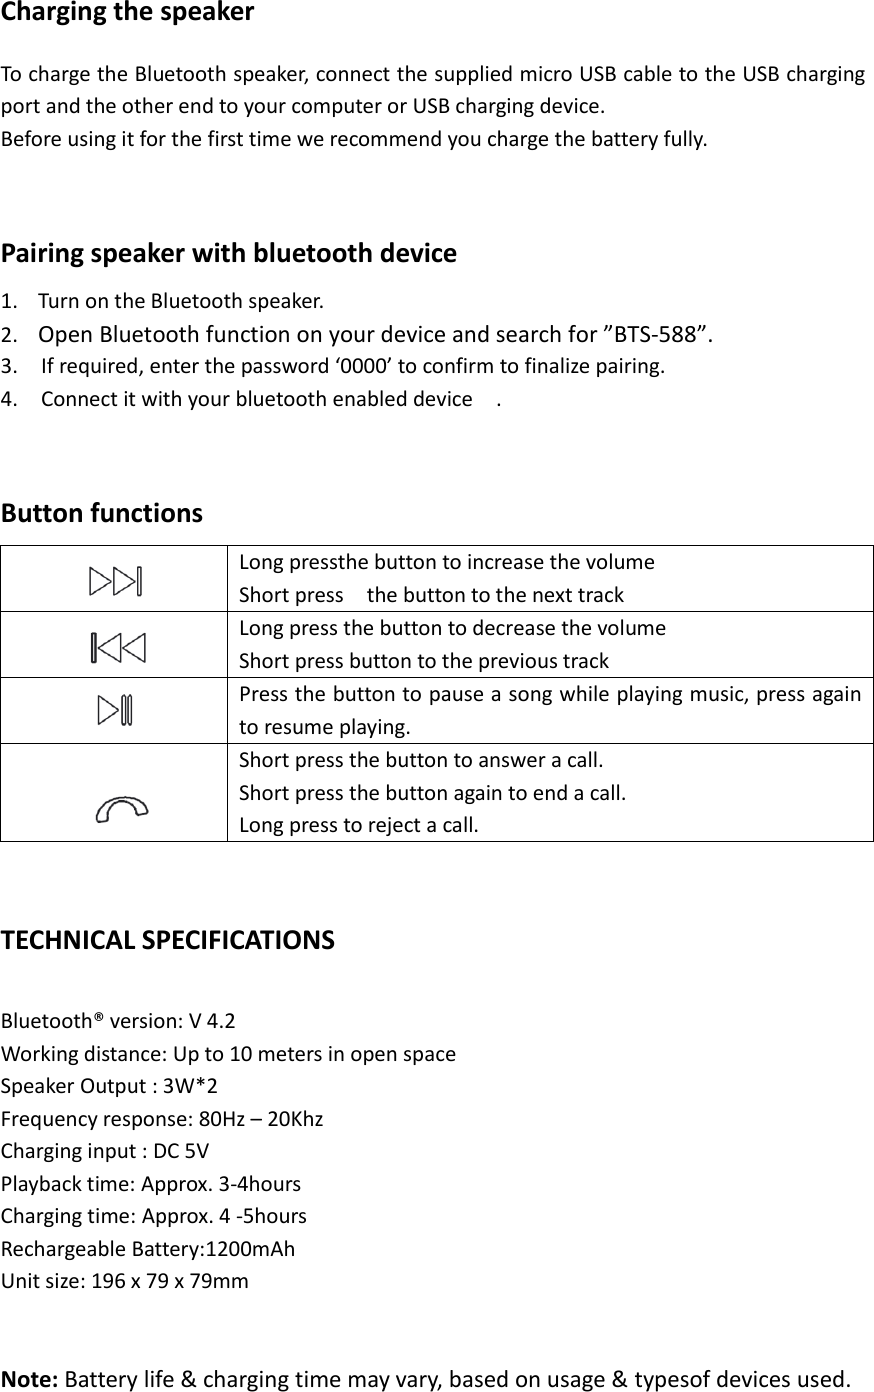 Page 3 of XinHuaMei Electronics BTS588 MINI BLUETOOTH SPEAKER User Manual 